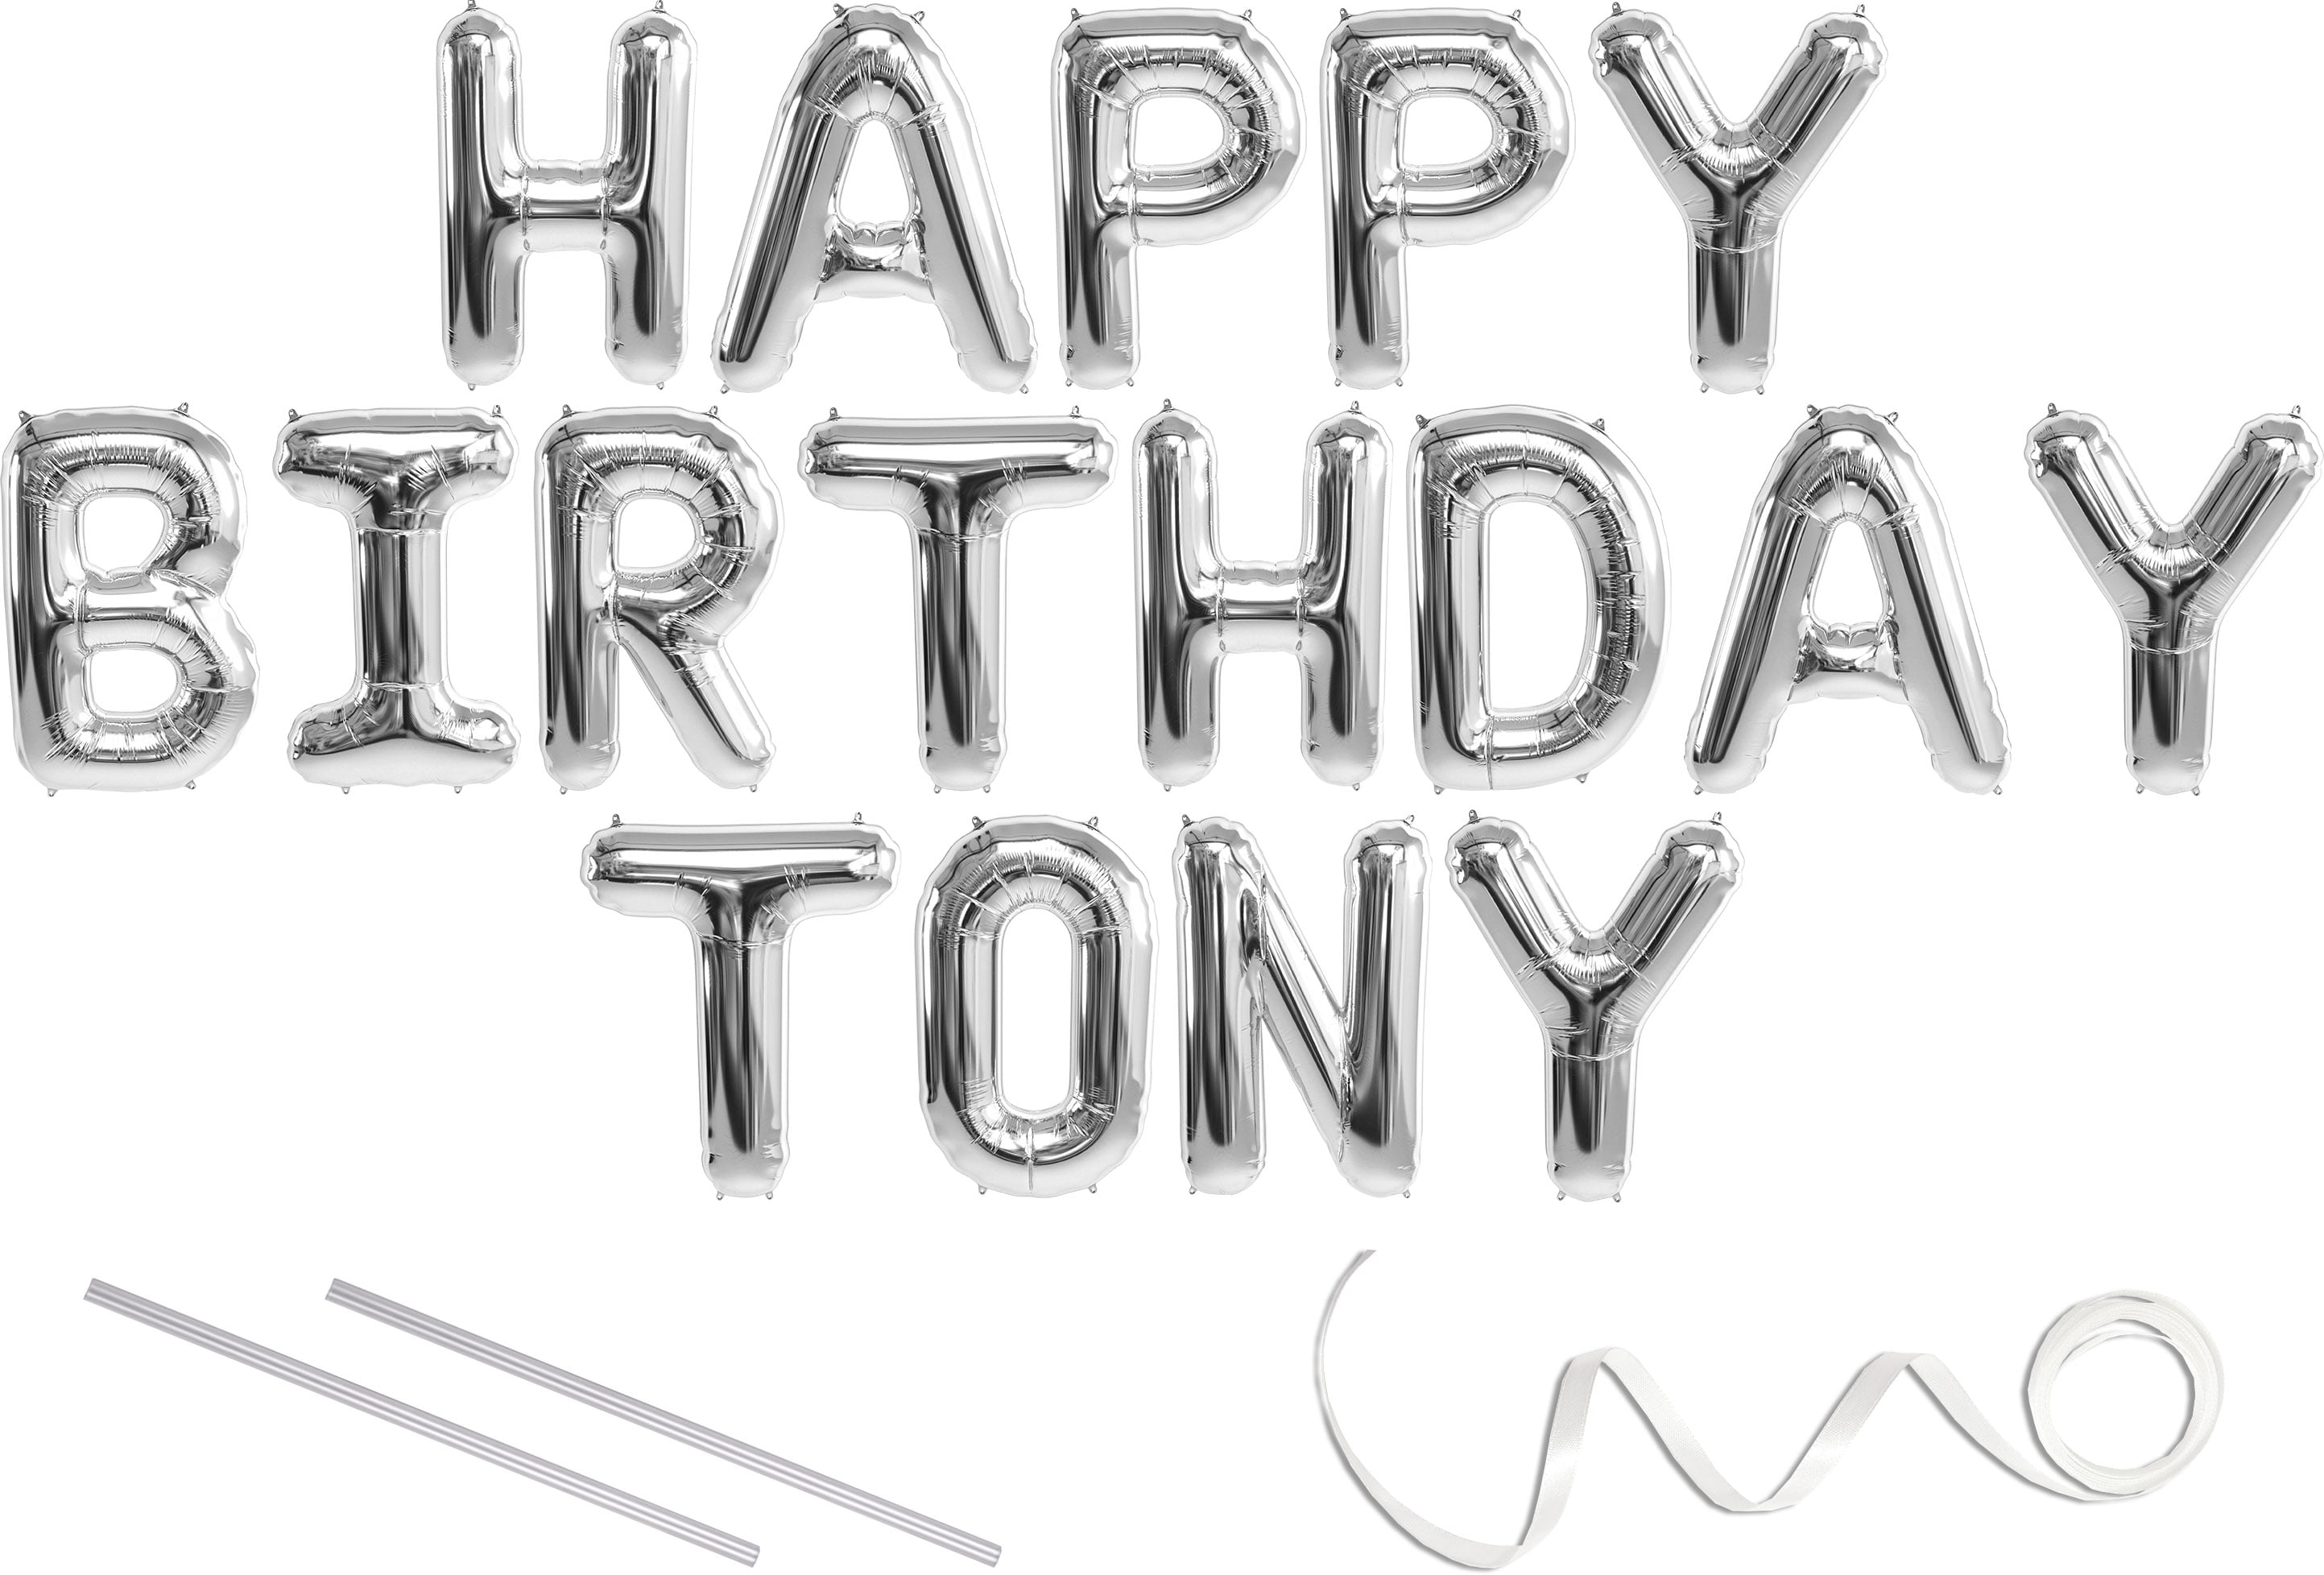 Tony Happy Birthday Mylar Balloon Banner Silver 16 Inch Letters Includes 2 Straws For Inflating String For Hanging Air Fill Only Does Not Float W Helium Great Birthday Decoration Walmart Com Walmart Com